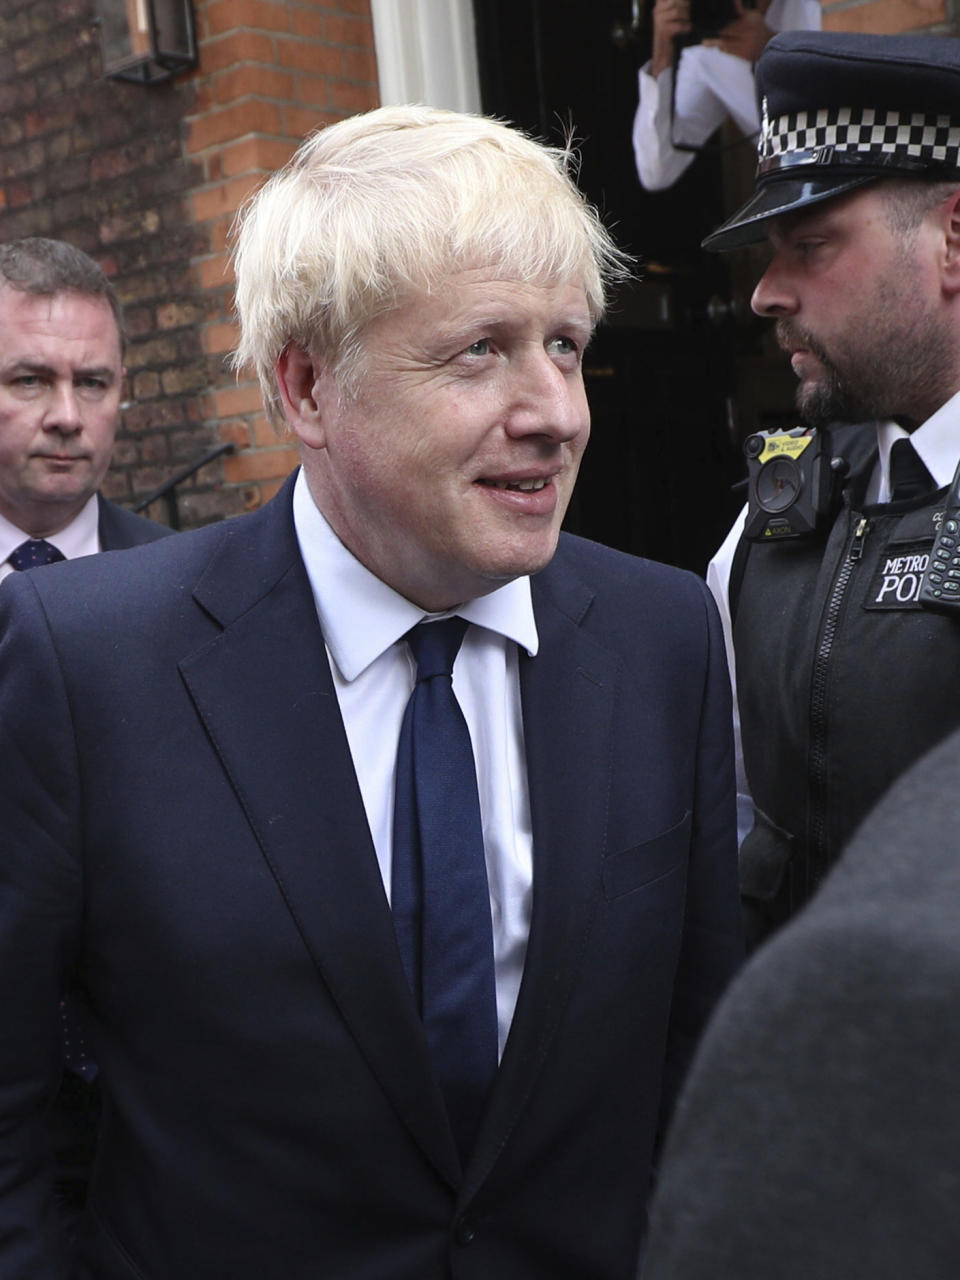 Conservative Party leadership contender Boris Johnson leaves his office in Westminster area of London, Monday July 22, 2019. Voting closes Monday in the ballot to elect Britain's next prime minister, from the two contenders Jeremy Hunt and Boris Johnson, as critics of likely winner Boris Johnson condemned his vow to take Britain out of the European Union with or without a Brexit deal.(Kirsty O'Connor/PA via AP)